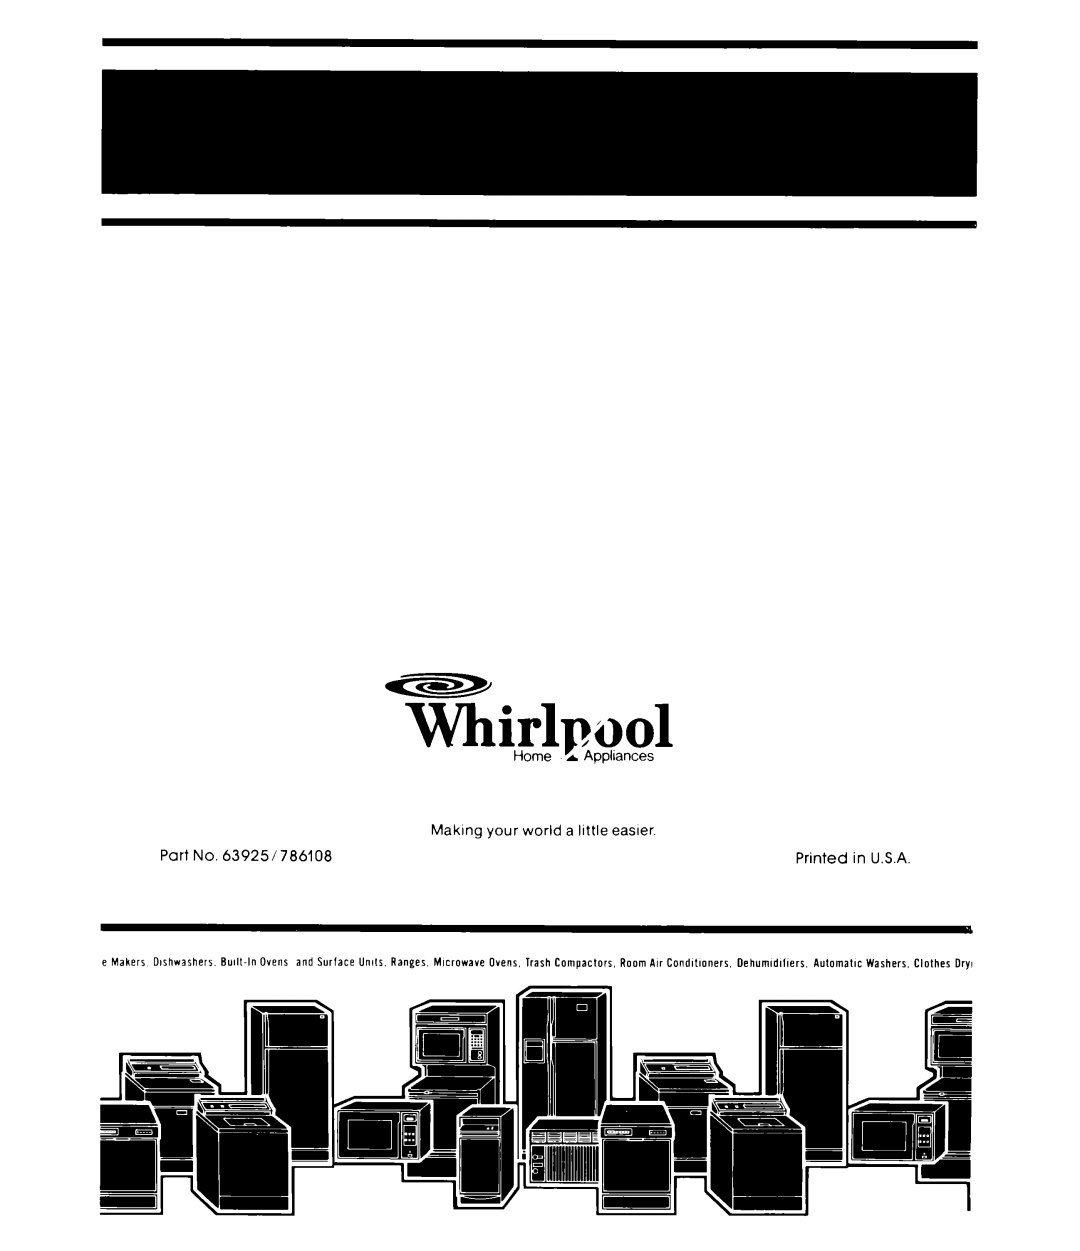 Whirlpool RC8900XMH manual ~irlpuol, Home L /Appliances, Making your world a little easier 